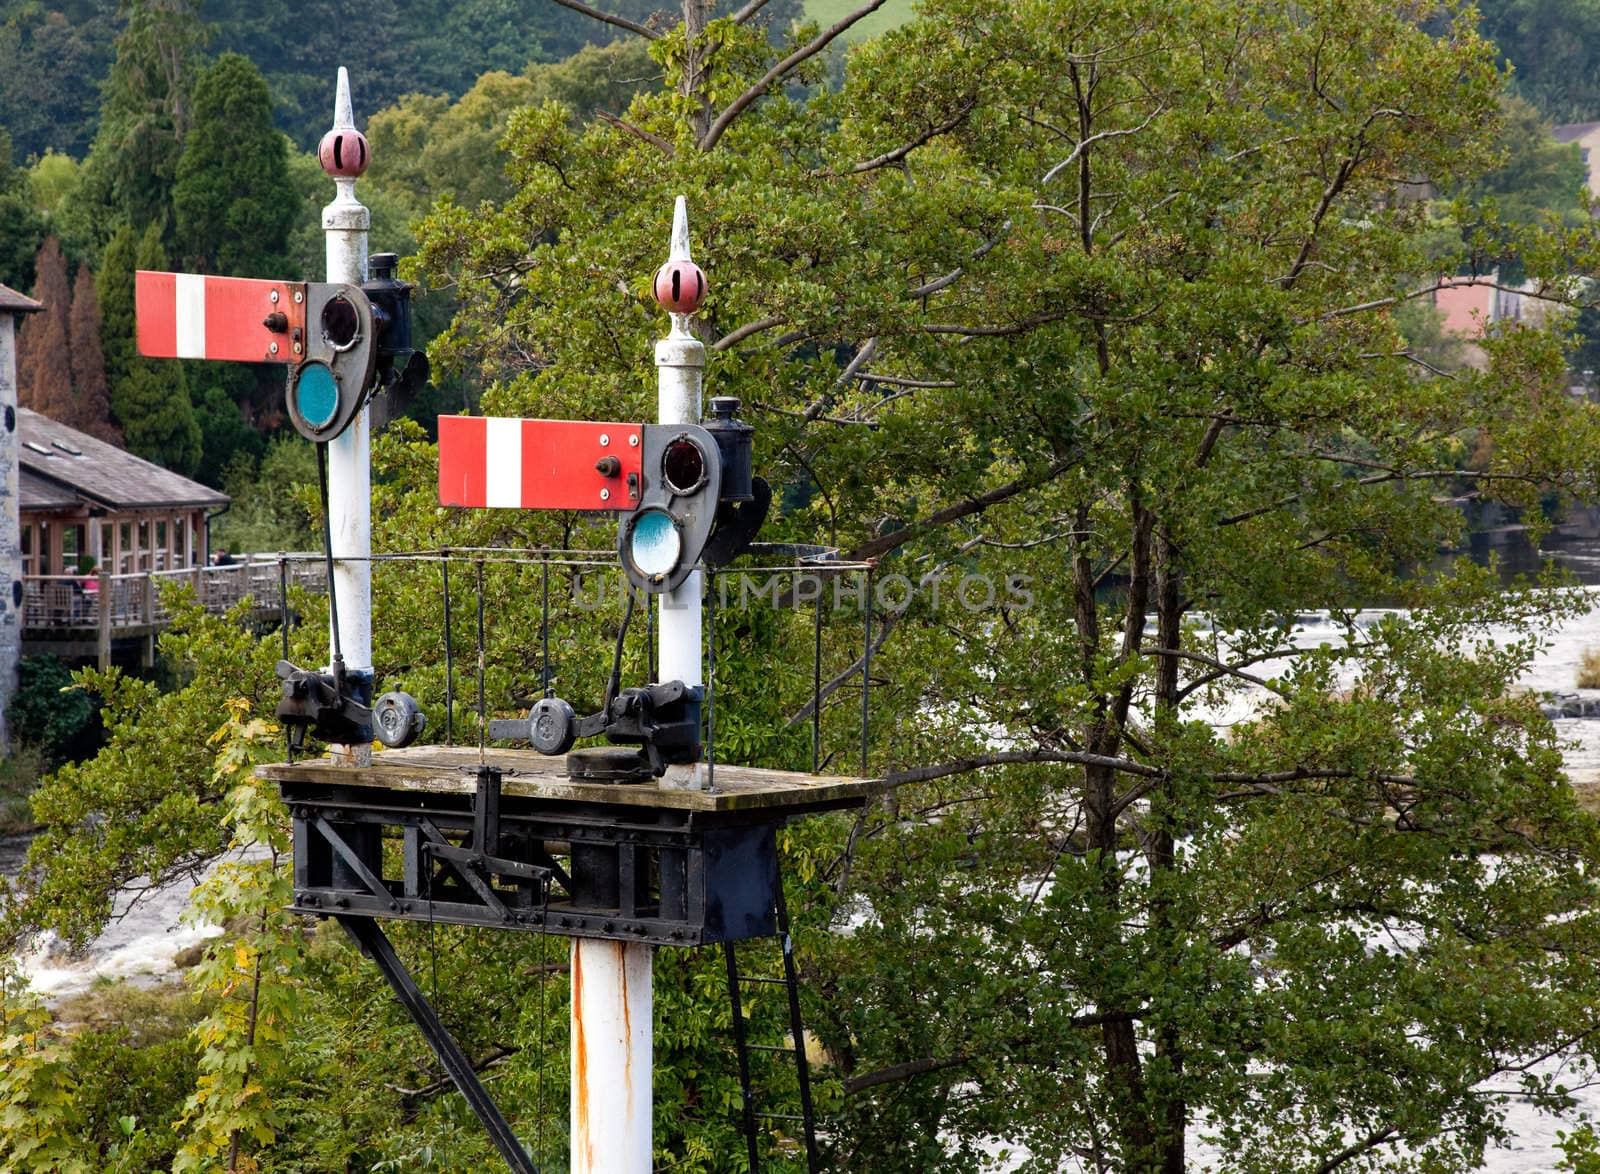 Old railway semaphore signals at Llangollen station by steheap